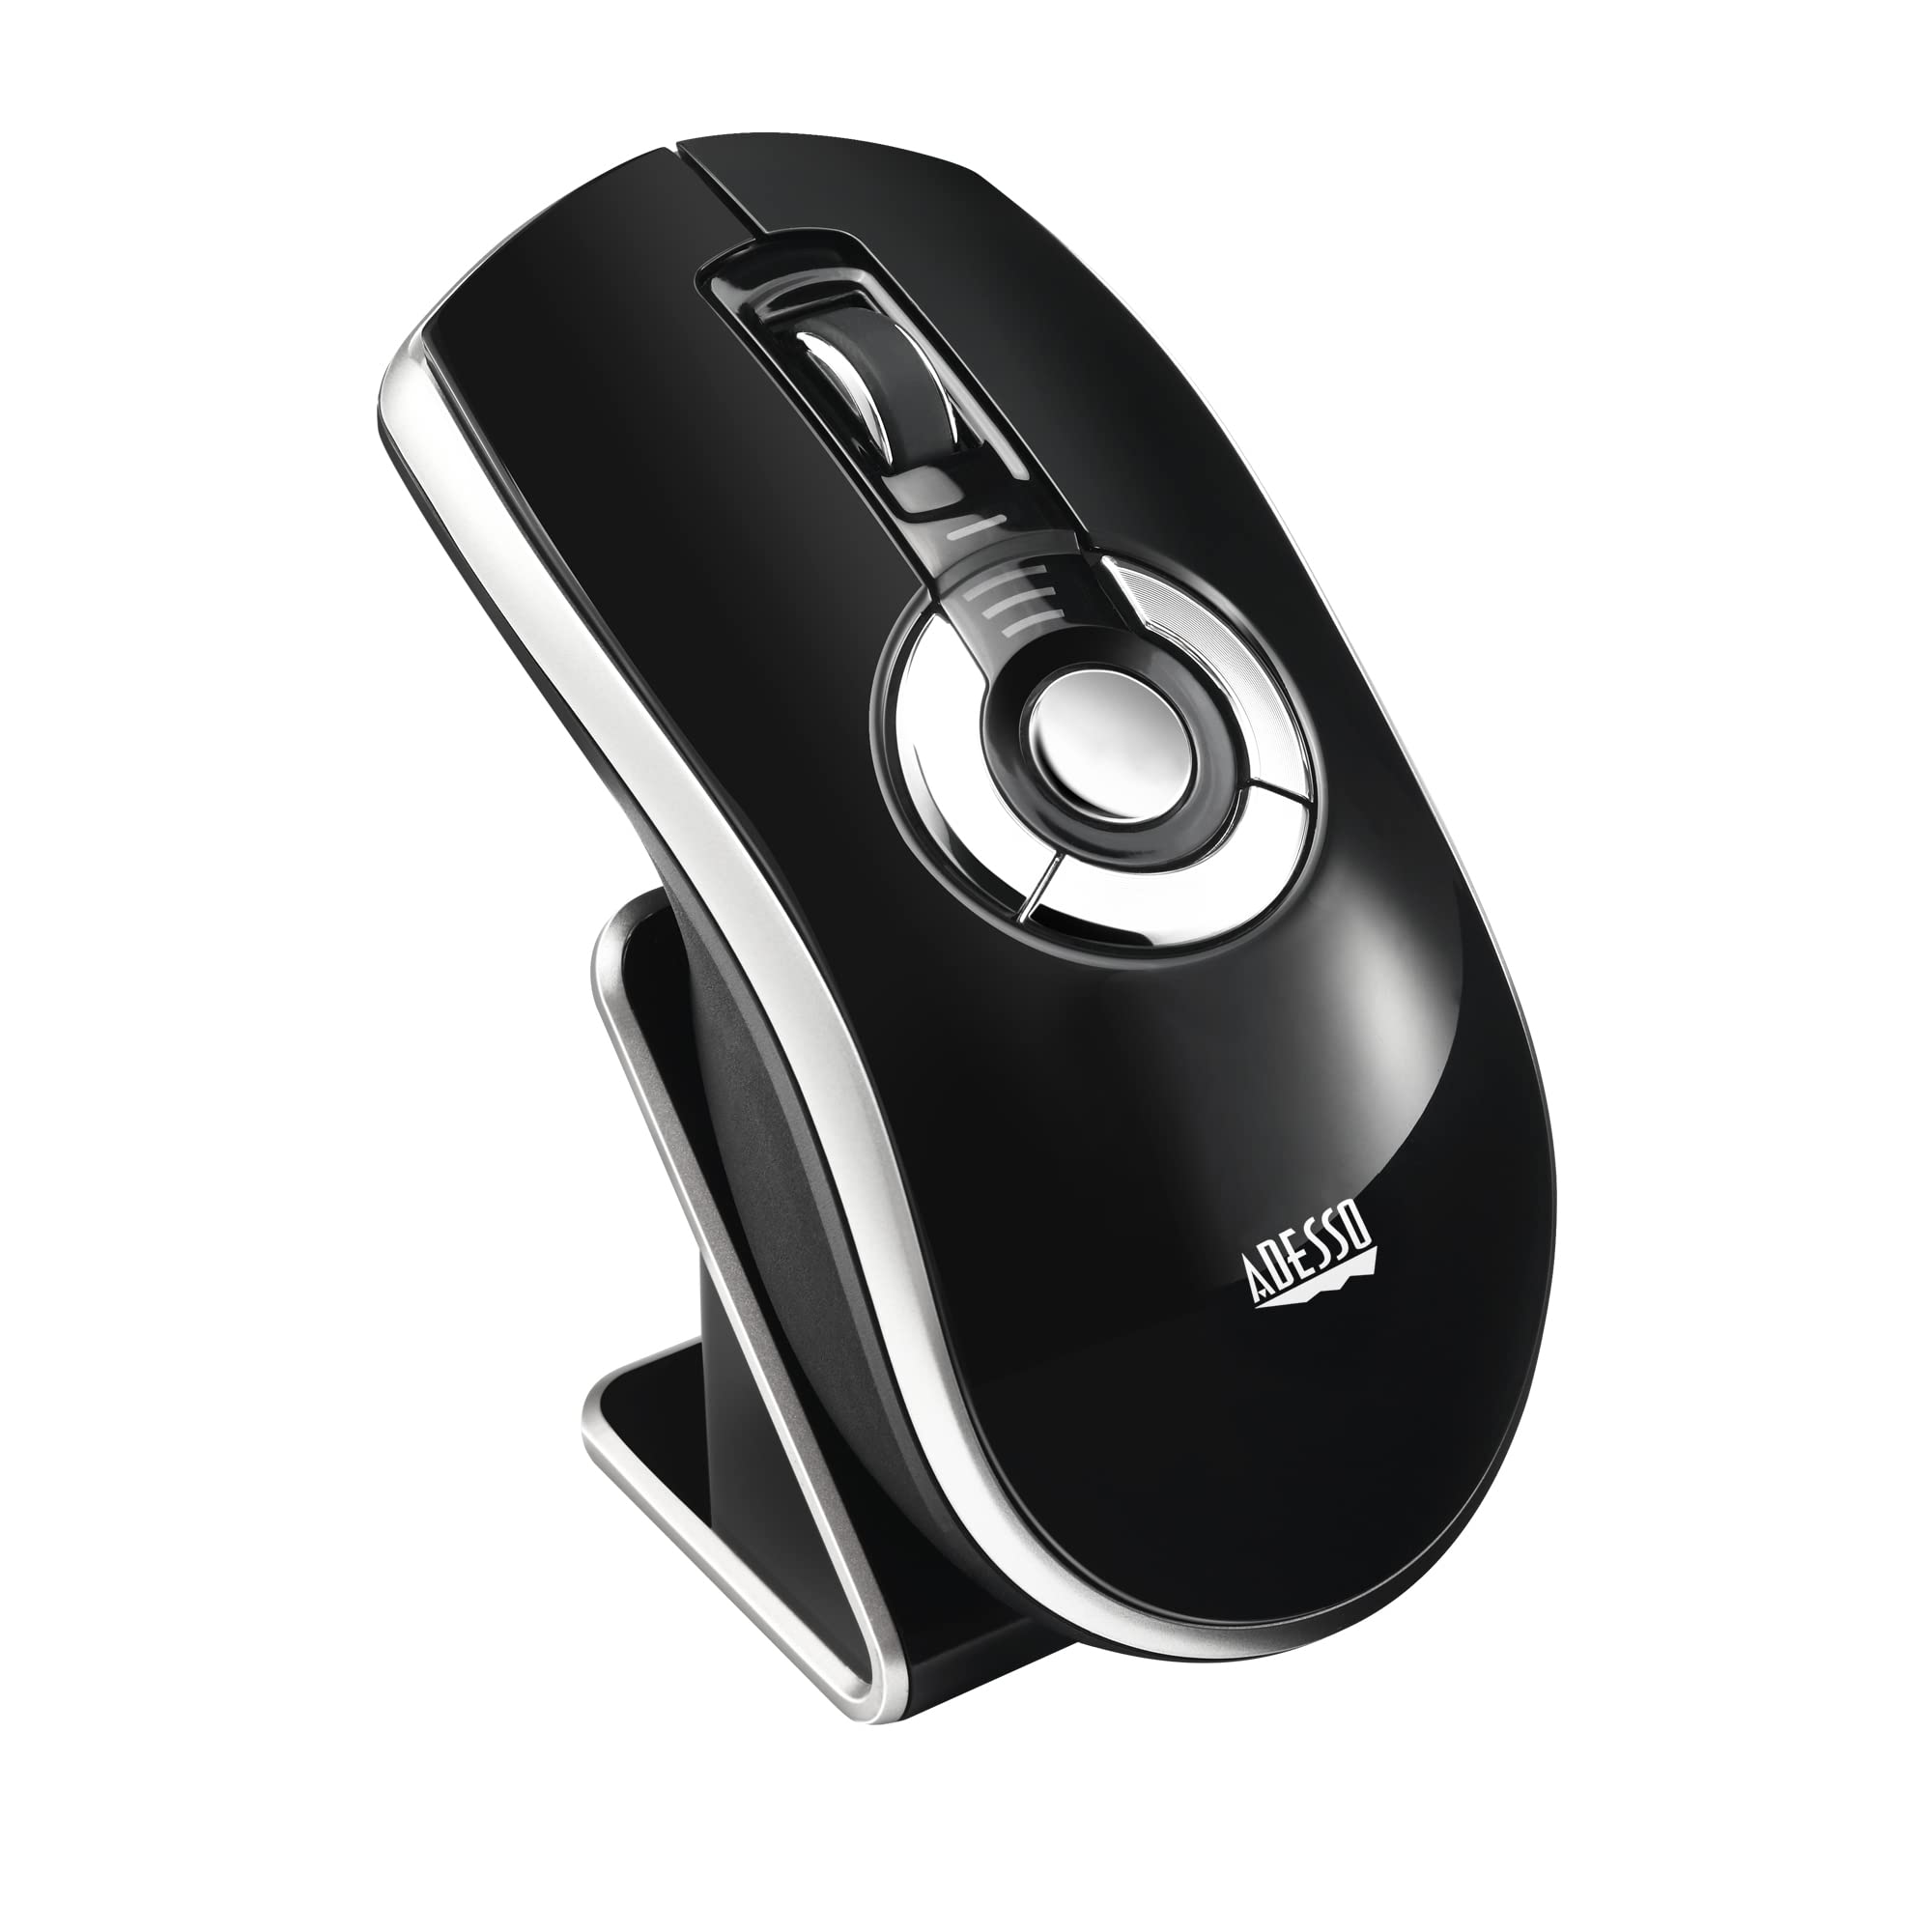 Adesso Air Mouse Elite Wireless Presenter Mouse, 2.4 GHz Frequency/100 ft Wireless Range, Left/Right Hand Use, Black